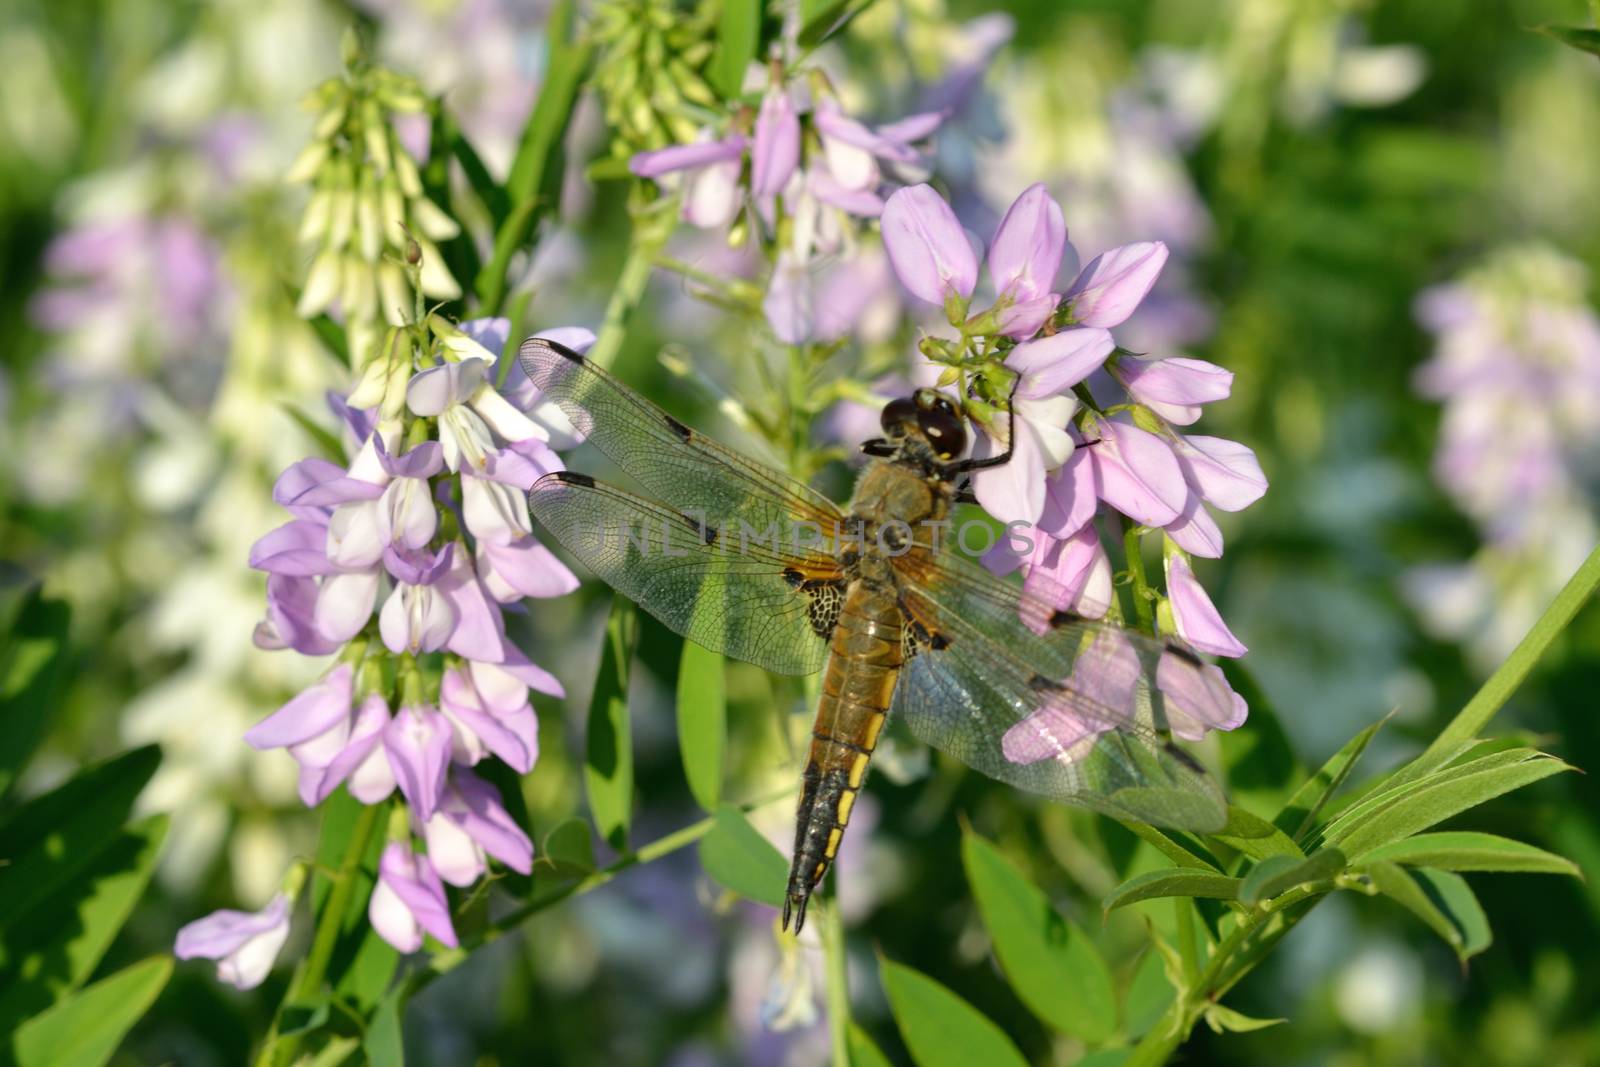 Dragonfly with flowers in background